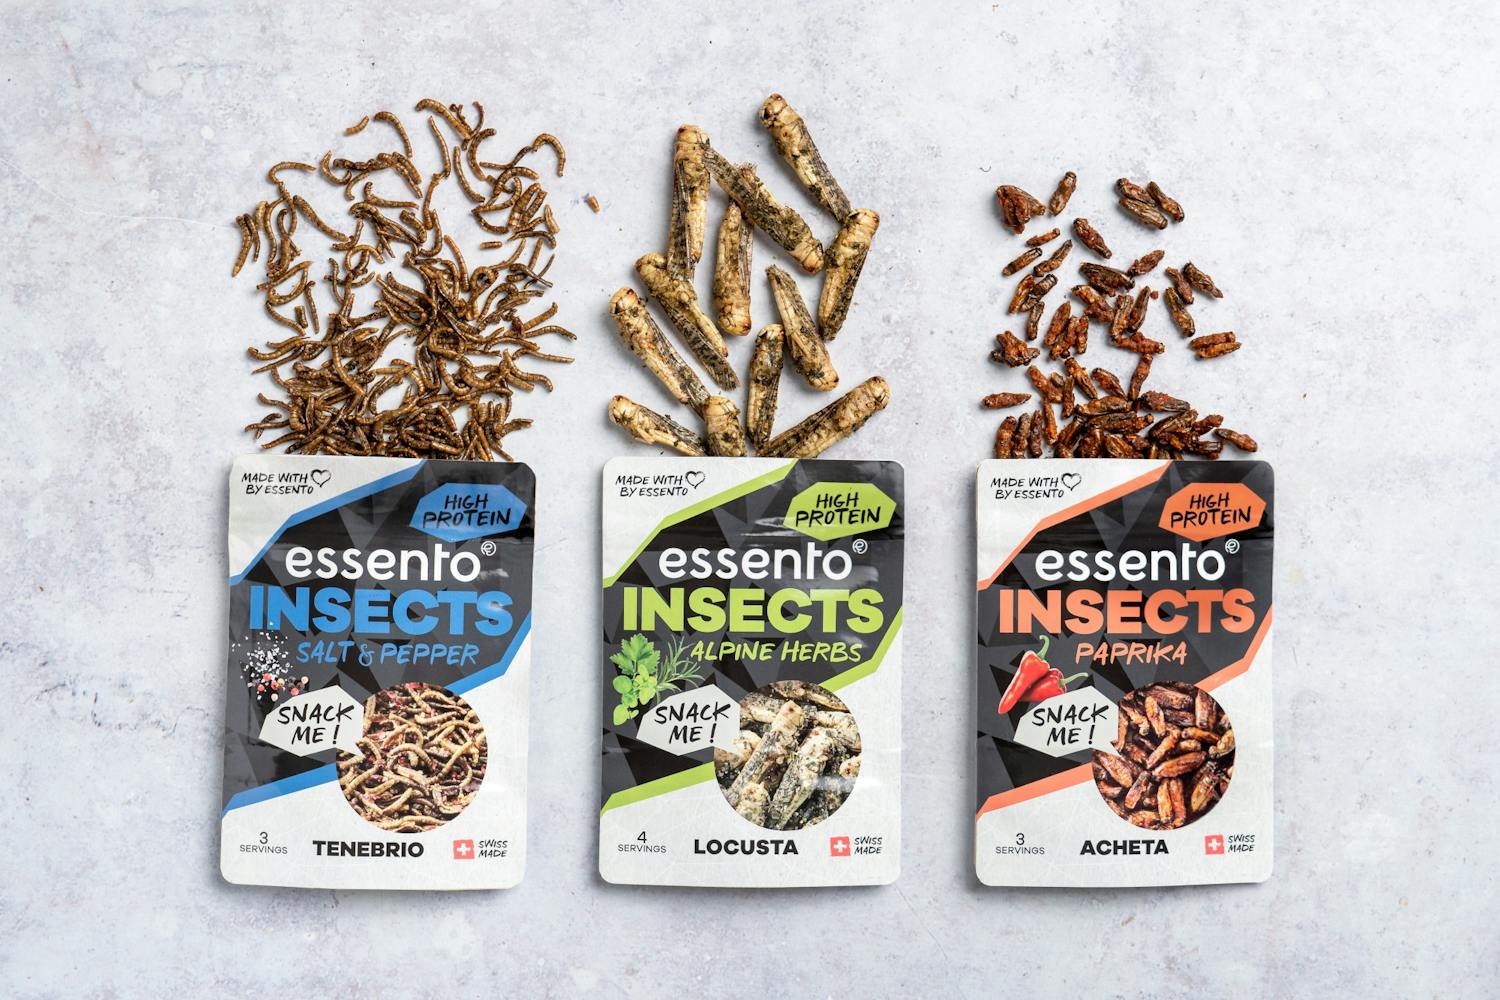 New Essento insect snack